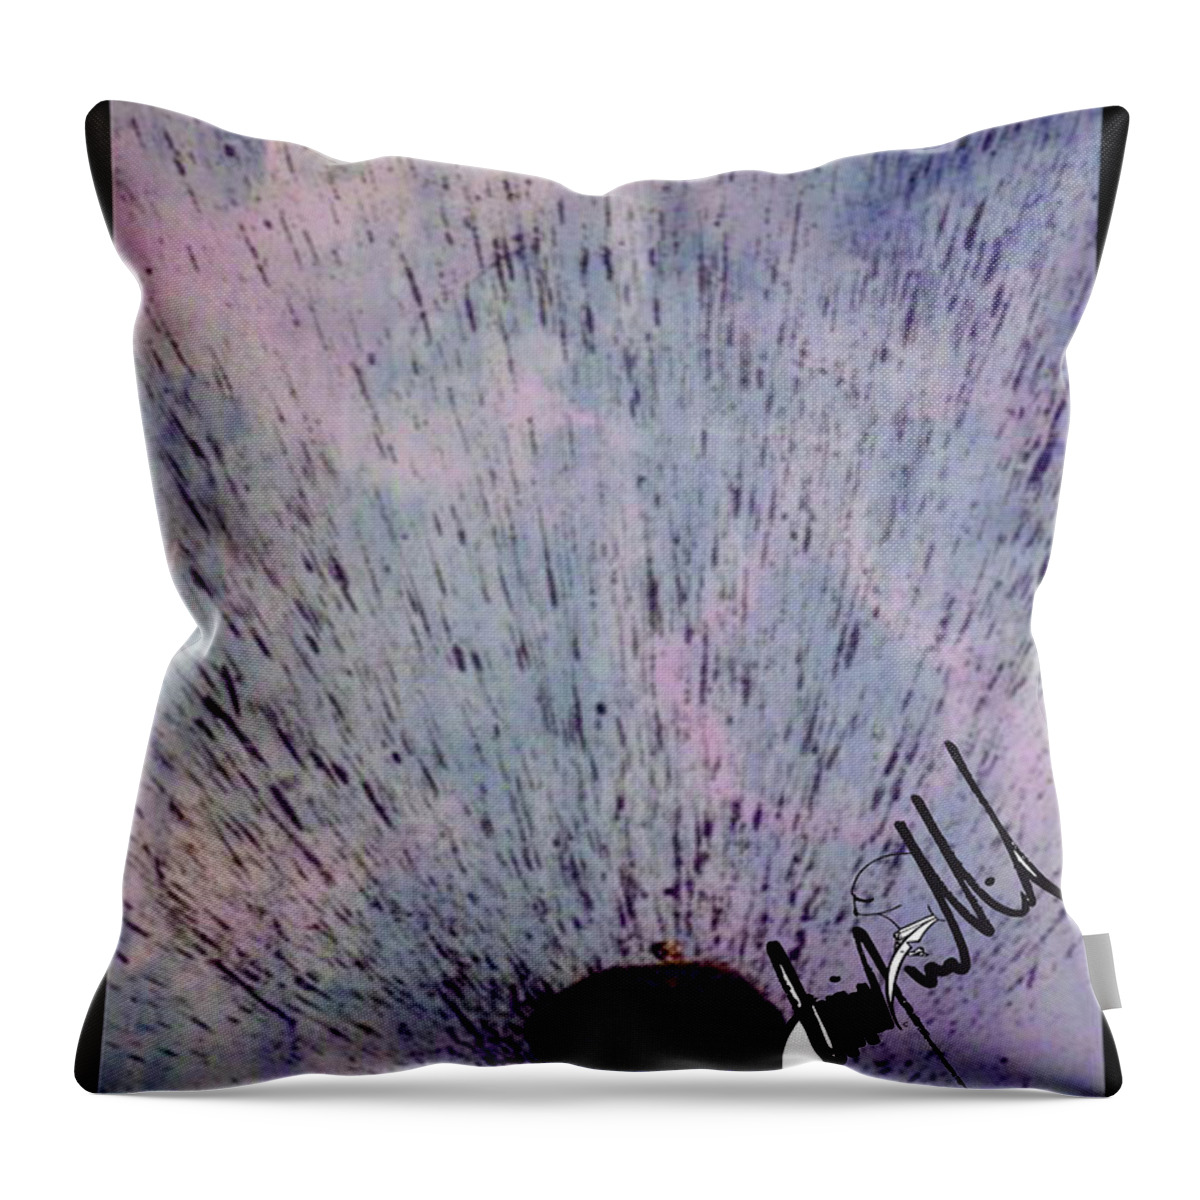  Throw Pillow featuring the digital art Mind by Jimmy Williams